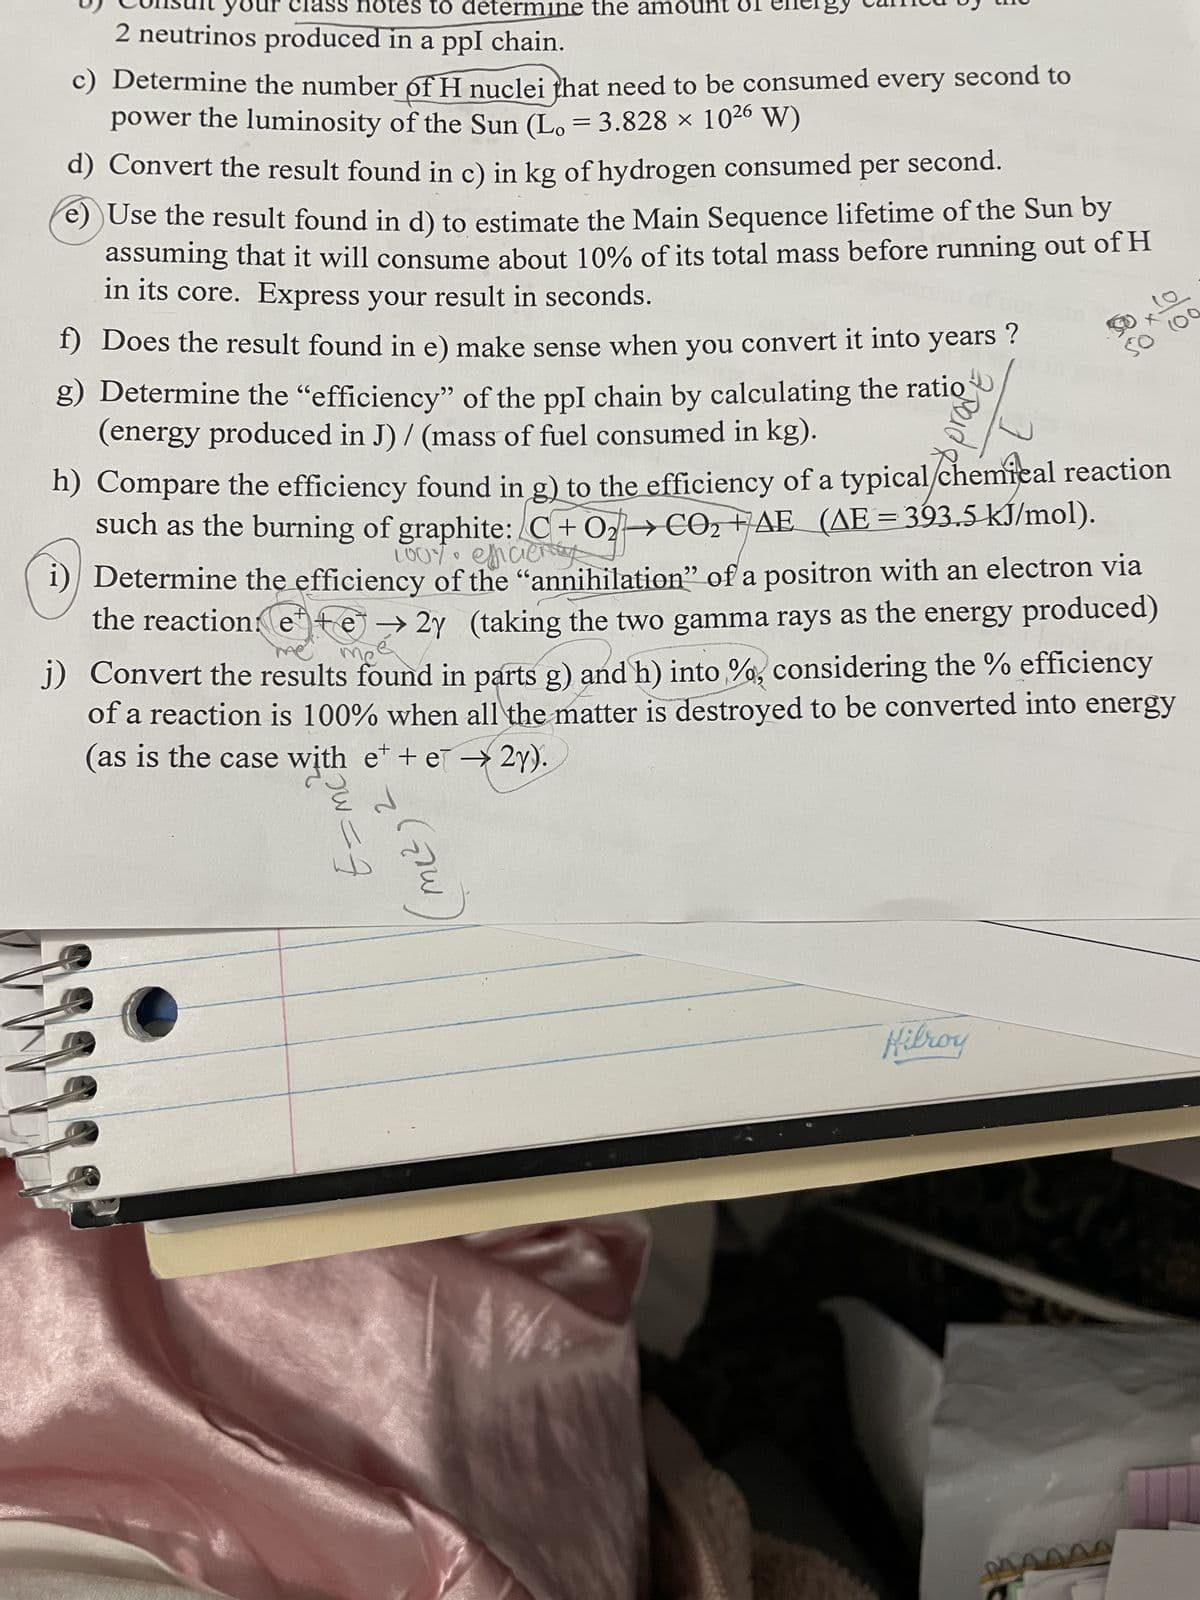 class notes to determine the amount
2 neutrinos produced in a ppl chain.
c) Determine the number of H nuclei that need to be consumed every second to
power the luminosity of the Sun (L. = 3.828 × 10²6 W)
d) Convert the result found in c) in kg of hydrogen consumed per second.
e) Use the result found in d) to estimate the Main Sequence lifetime of the Sun by
assuming that it will consume about 10% of its total mass before running out of H
in its core. Express your result in seconds.
f) Does the result found in e) make sense when you convert it into years?
g) Determine the "efficiency" of the ppl chain by calculating the ratio
(energy produced in J)/ (mass of fuel consumed in kg).
h) Compare the efficiency found in g) to the efficiency of a typical chemical reaction
such as the burning of graphite: C+02 CO₂ +AE (AE = 393.5 kJ/mol).
@
i) Determine the efficiency of the "annihilation" of a positron with an electron via
the reaction: ete → 2y (taking the two gamma rays as the energy produced)
j) Convert the results found in parts g) and h) into %, considering the % efficiency
of a reaction is 100% when all the matter is destroyed to be converted into energy
(as is the case with et + e→ 2y).
jw=f
2
m(²)
BE
Hilroy
S
MAA